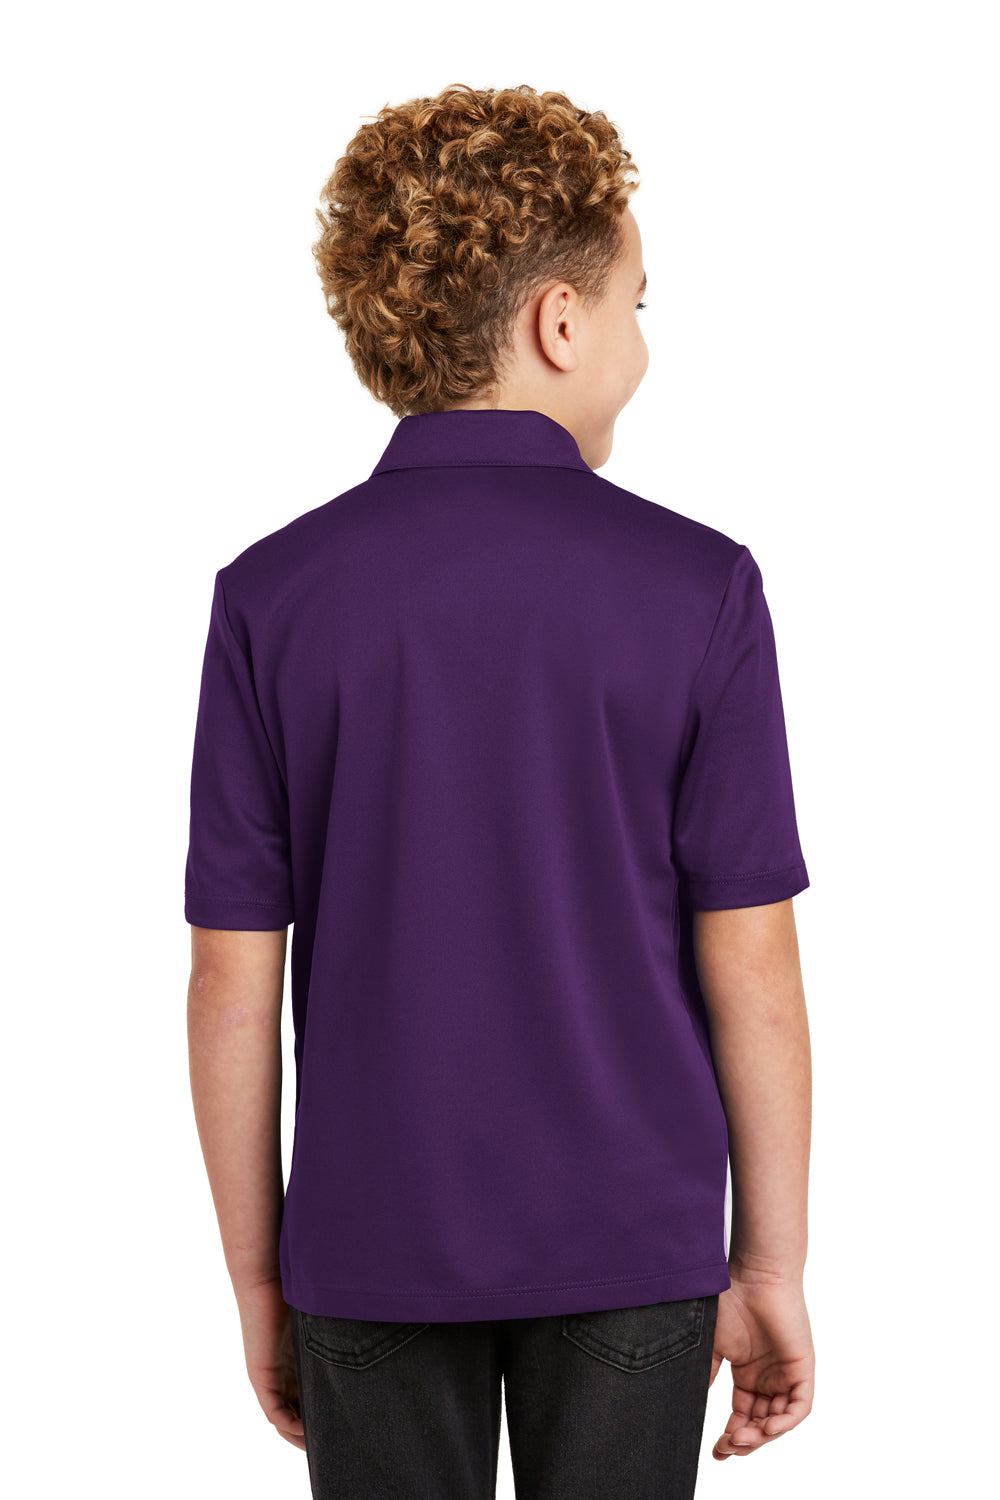 Port Authority Y540 Youth Silk Touch Performance Moisture Wicking Short Sleeve Polo Shirt Purple Back